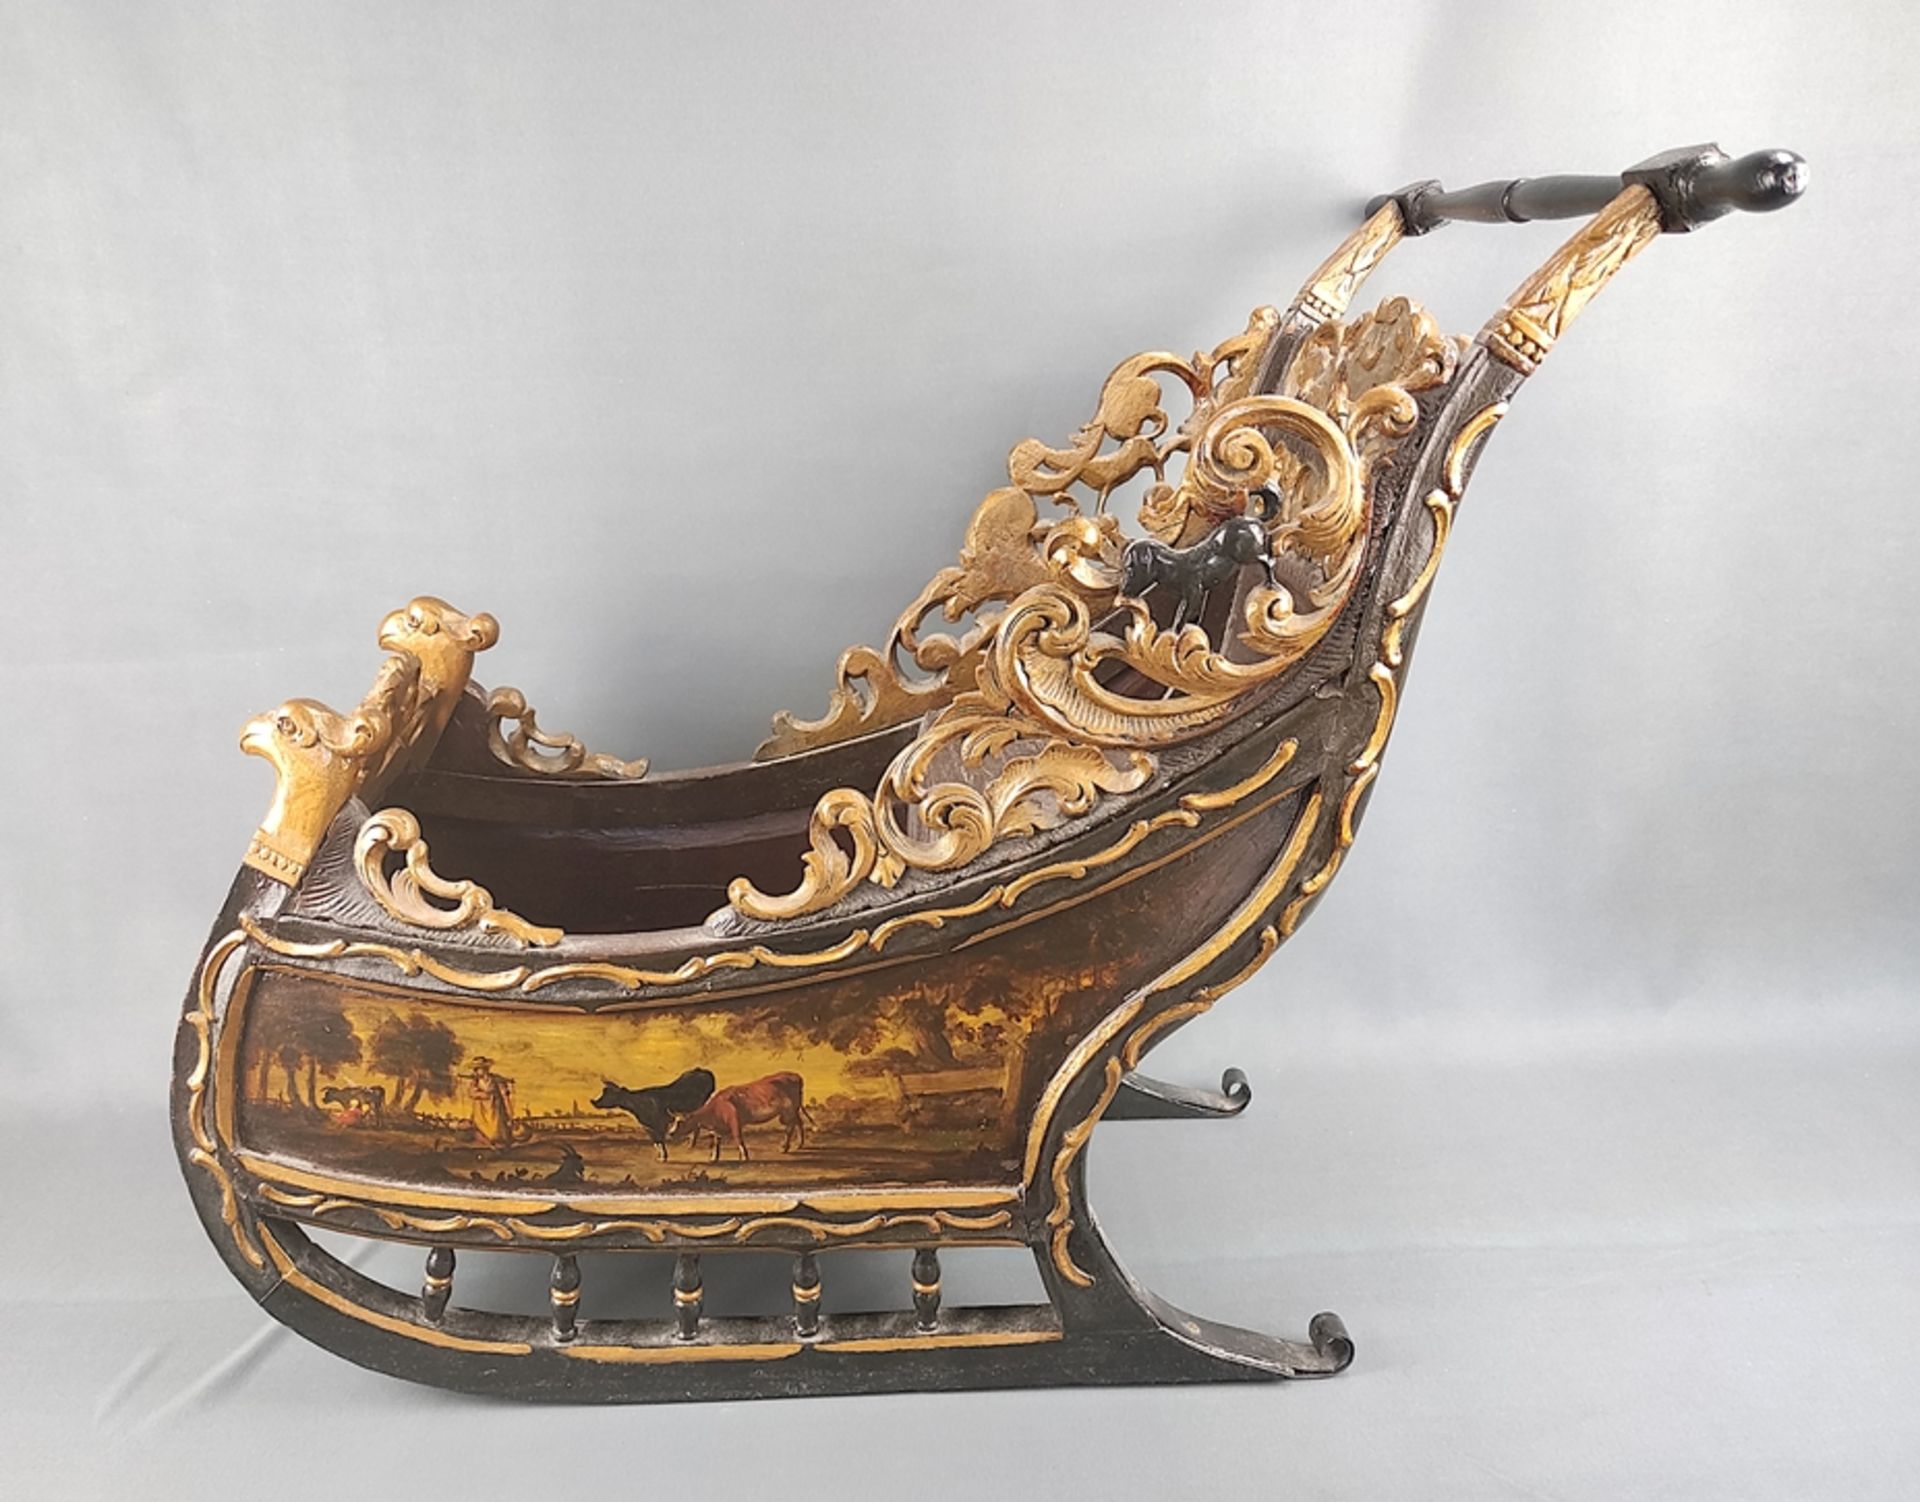 Antique sleigh, carousel/ dolls sleigh, 19th century, wood carved and colored, sides elaborately pa - Image 2 of 5